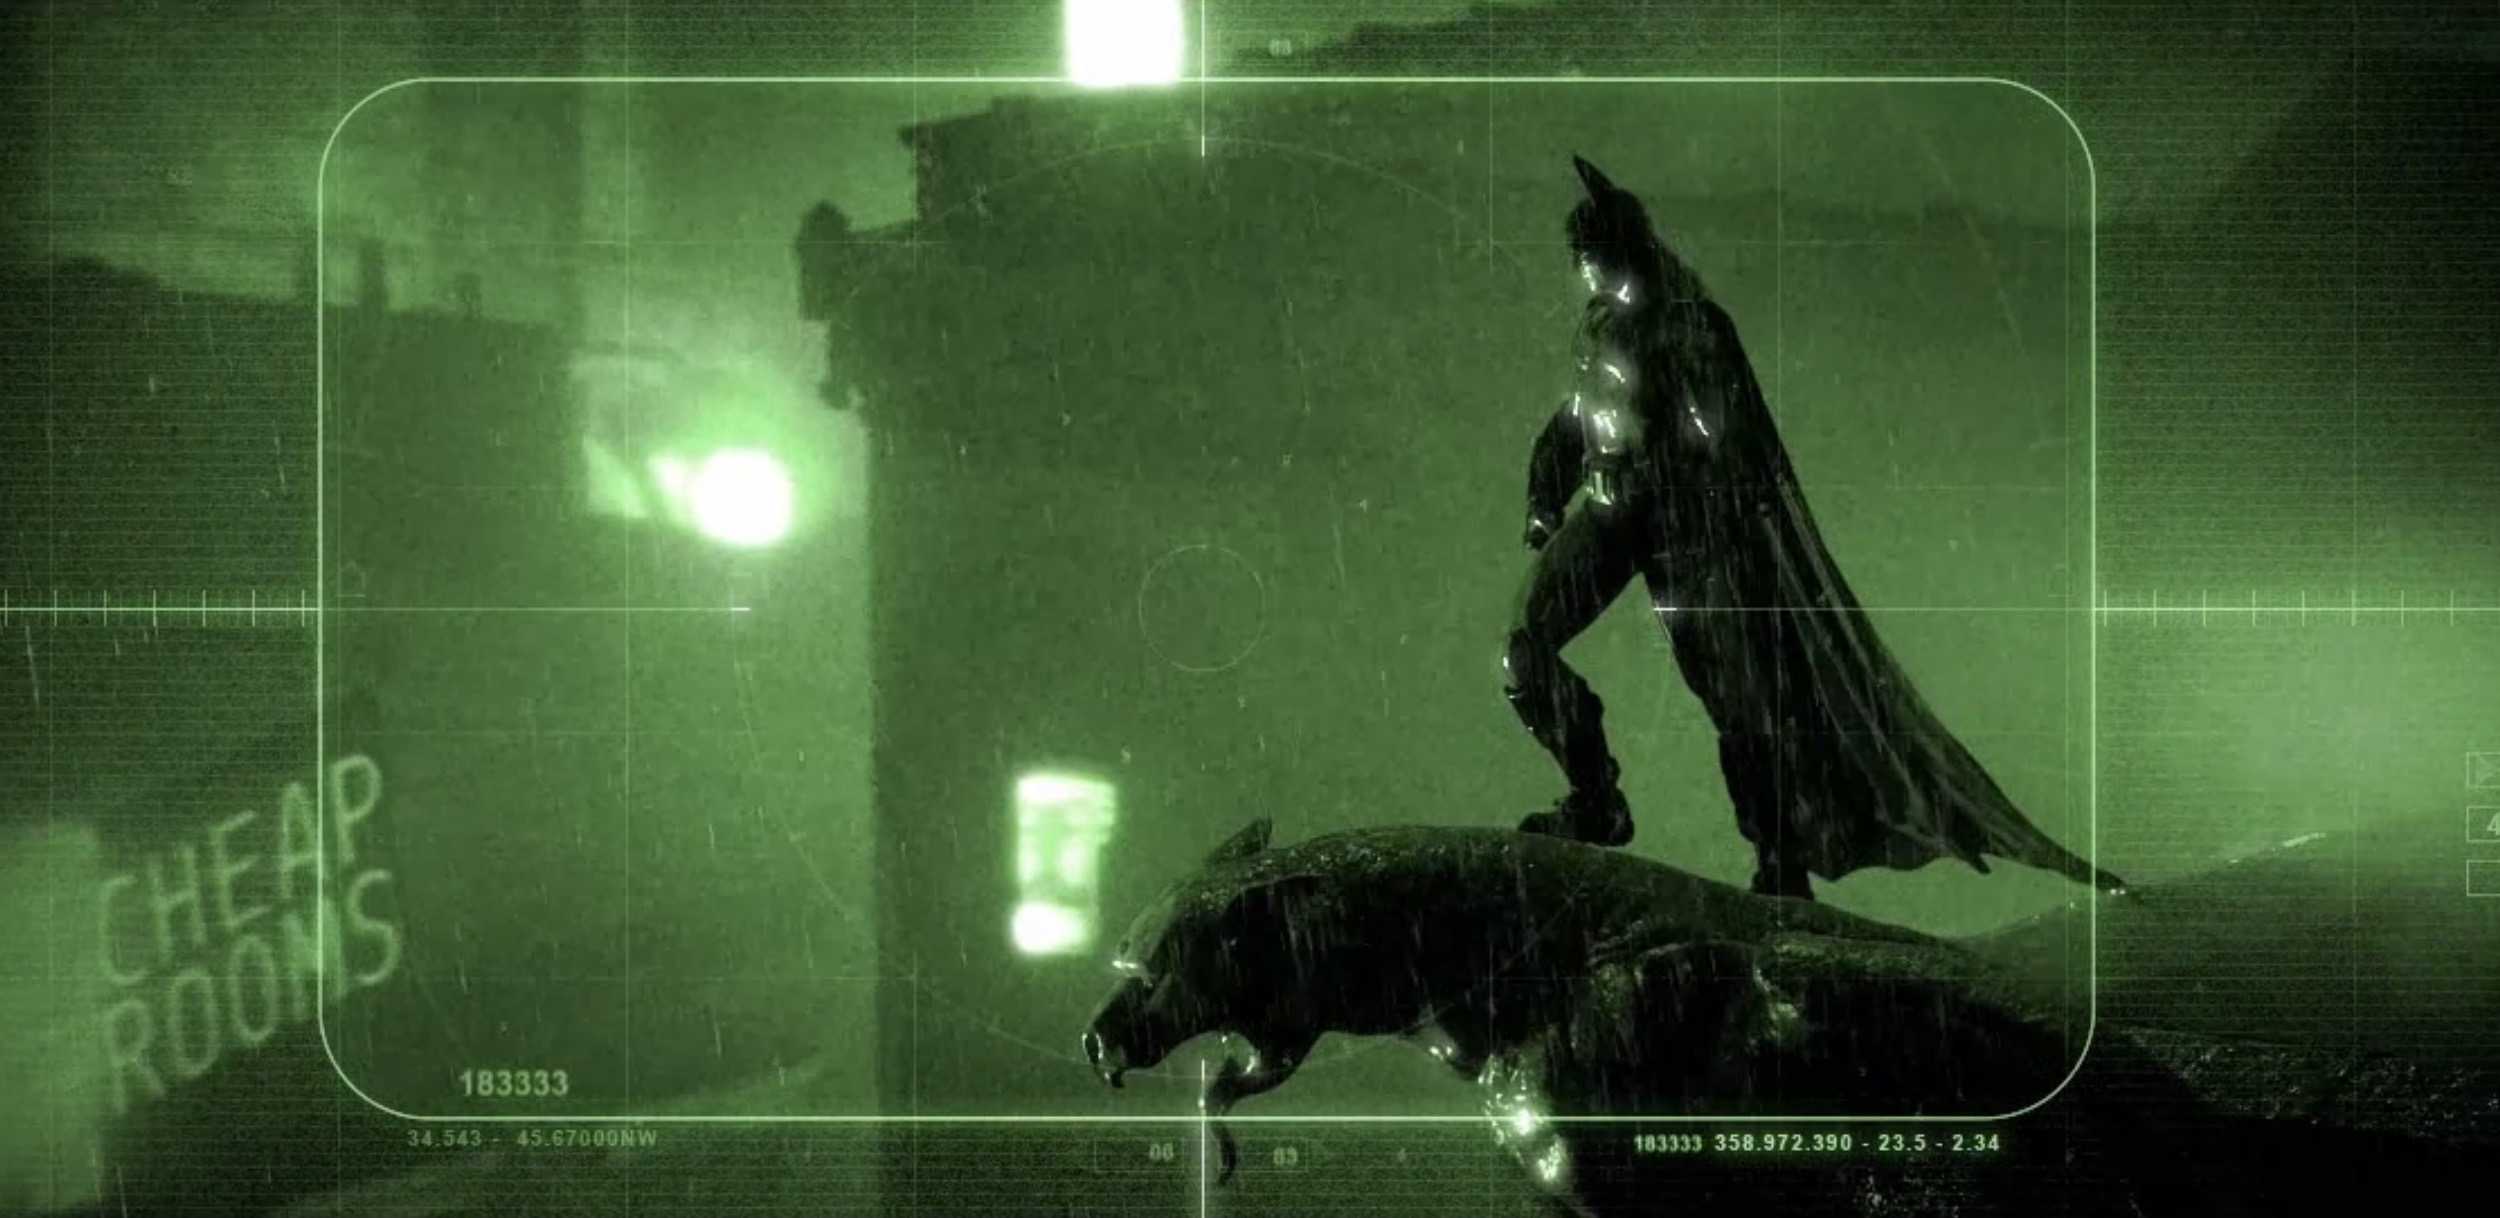 Rumor: Batman Arkham Asylum and Batman Arkham City to be remastered for the  Playstation 4 and Xbox One